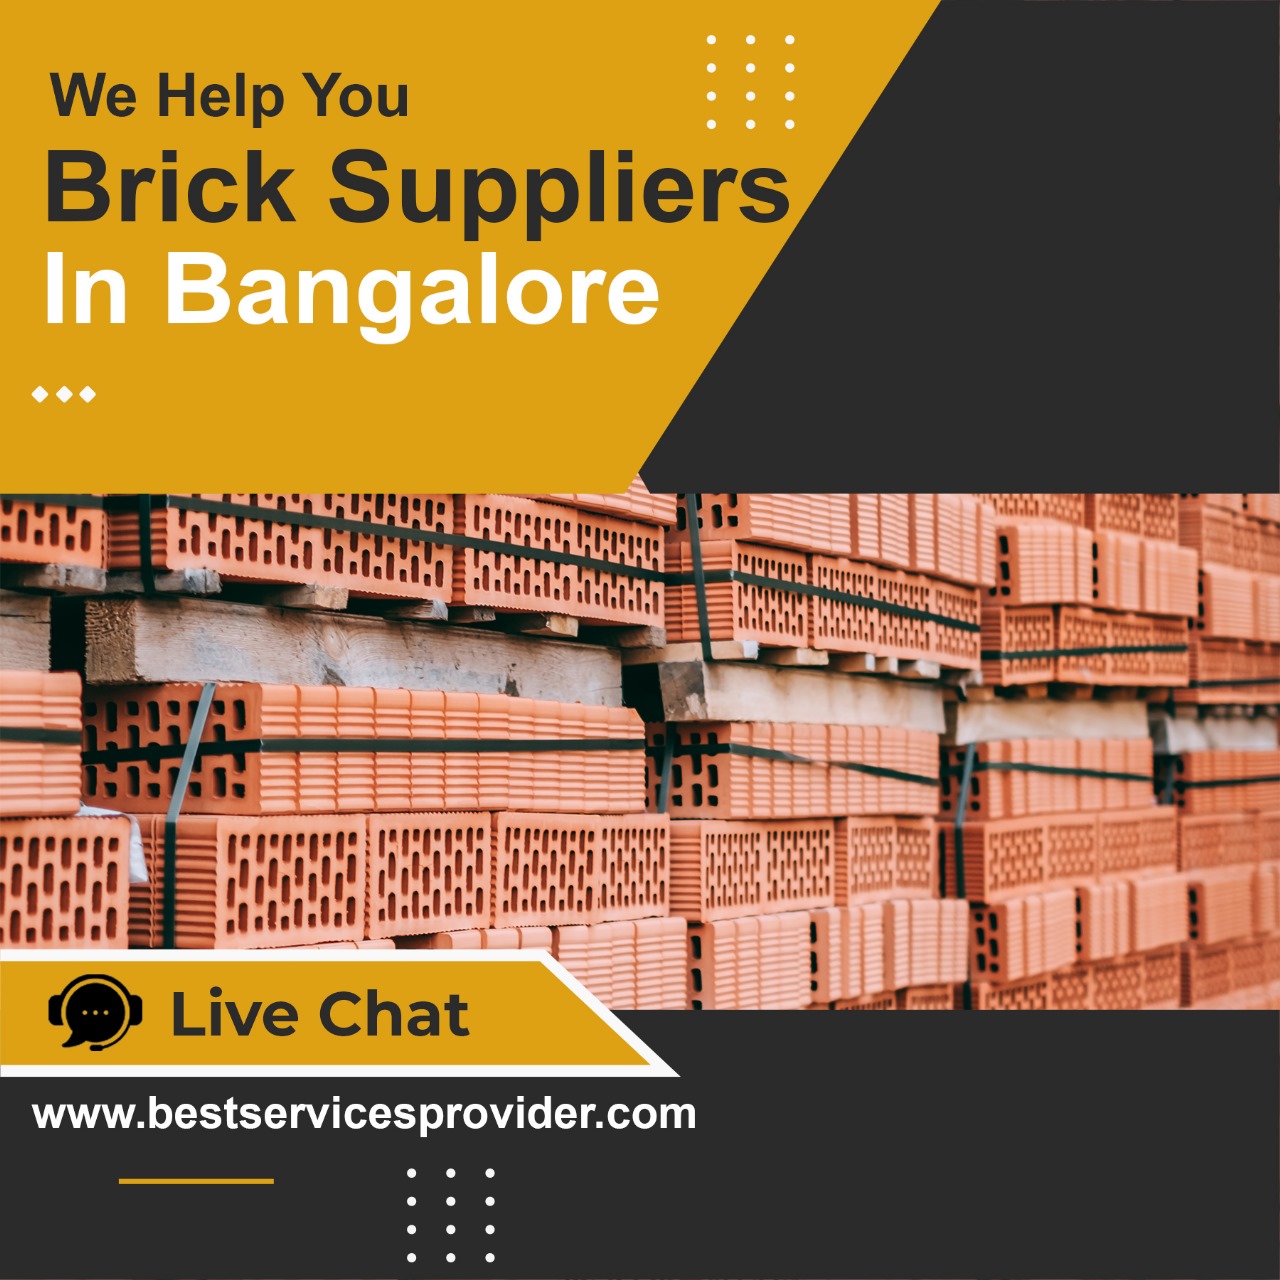 Brick Suppliers In Bangalore